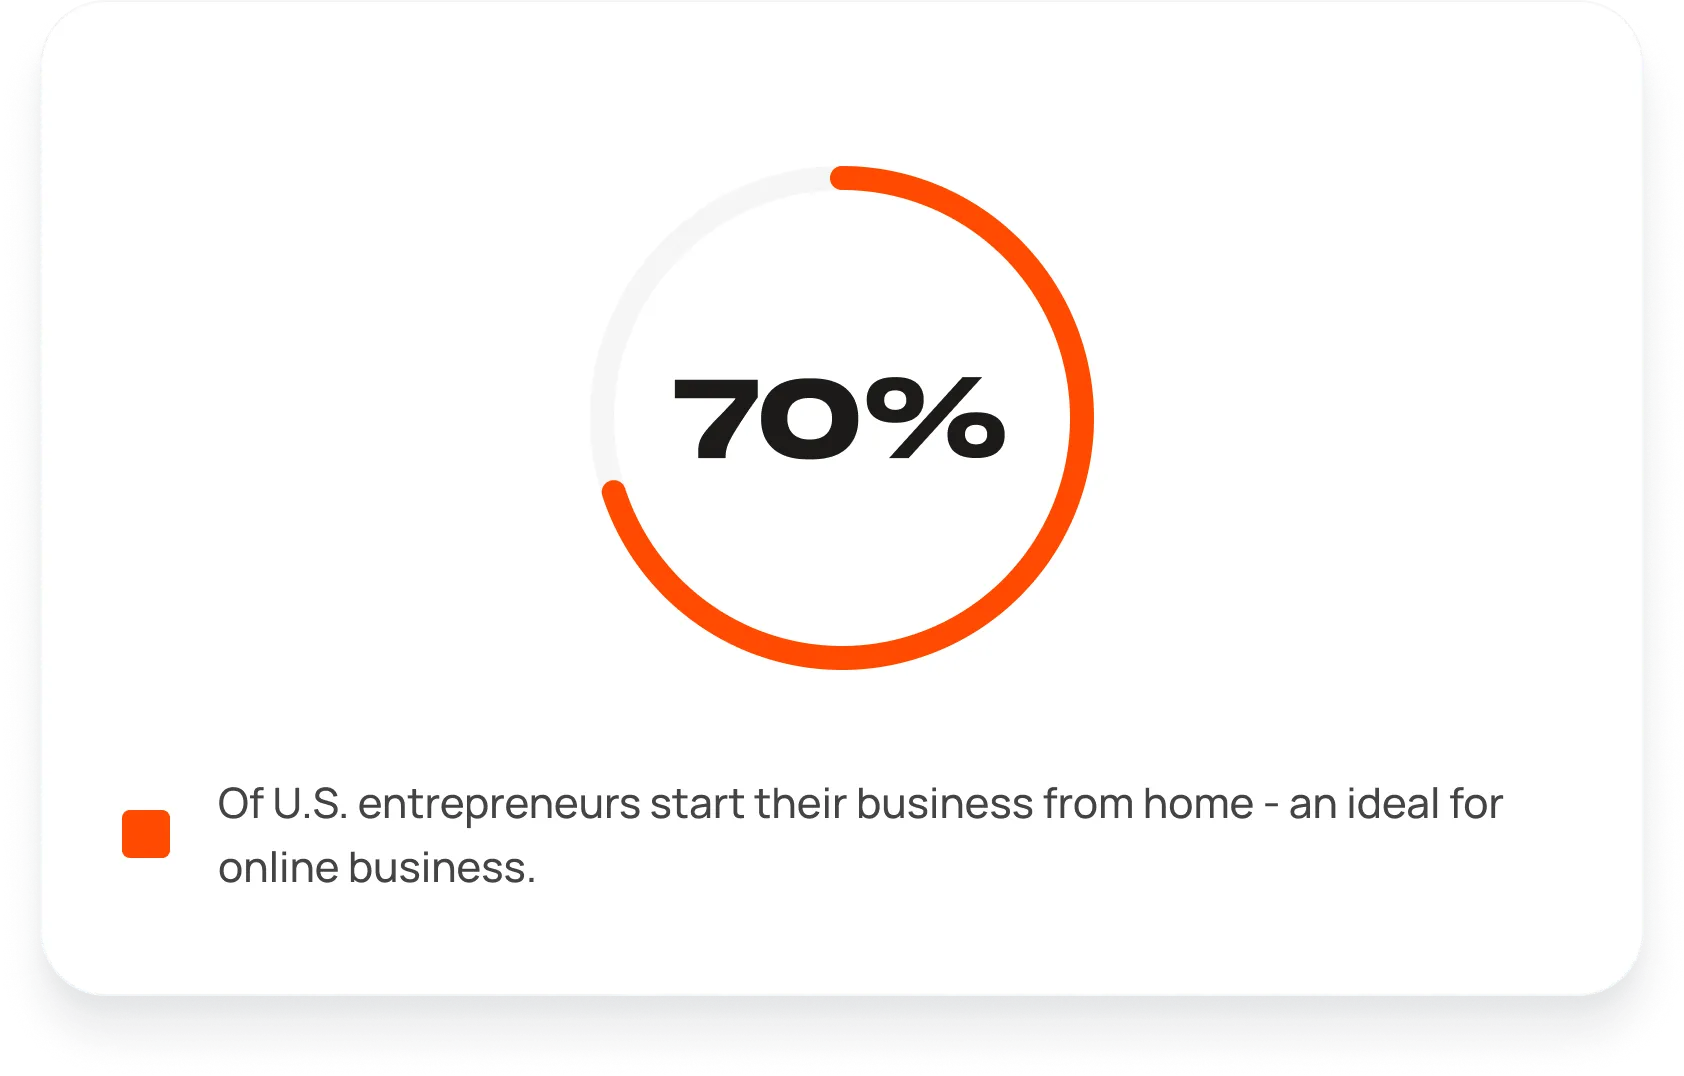 70% of U.S. entrepreneurs start their business from home - an ideal for online business.